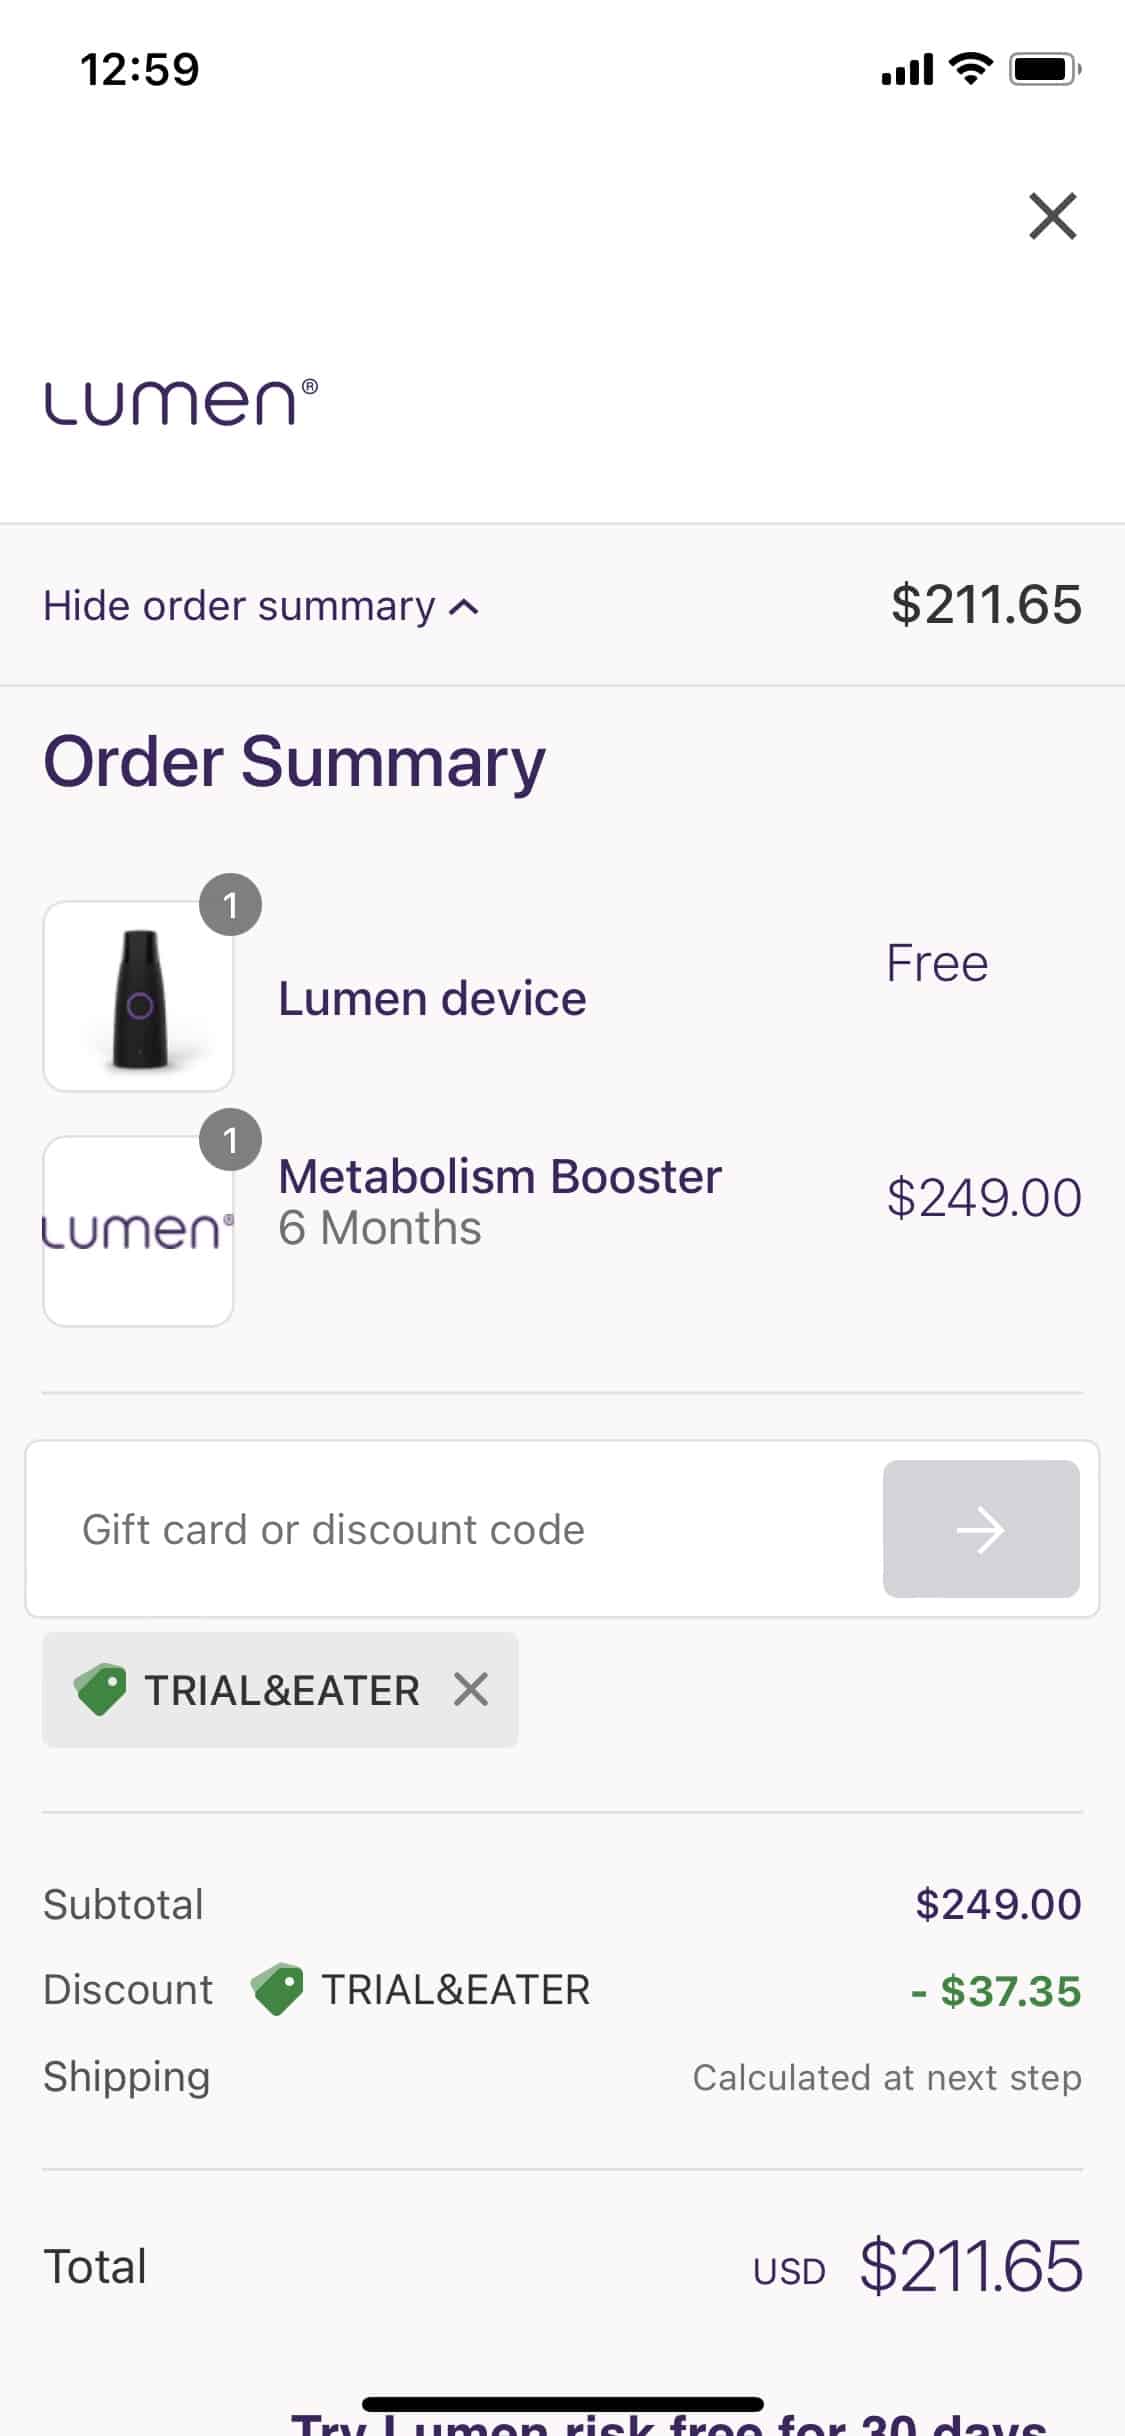 screenshot of how to use Trial&Eater coupon code for Lumen device 6 month